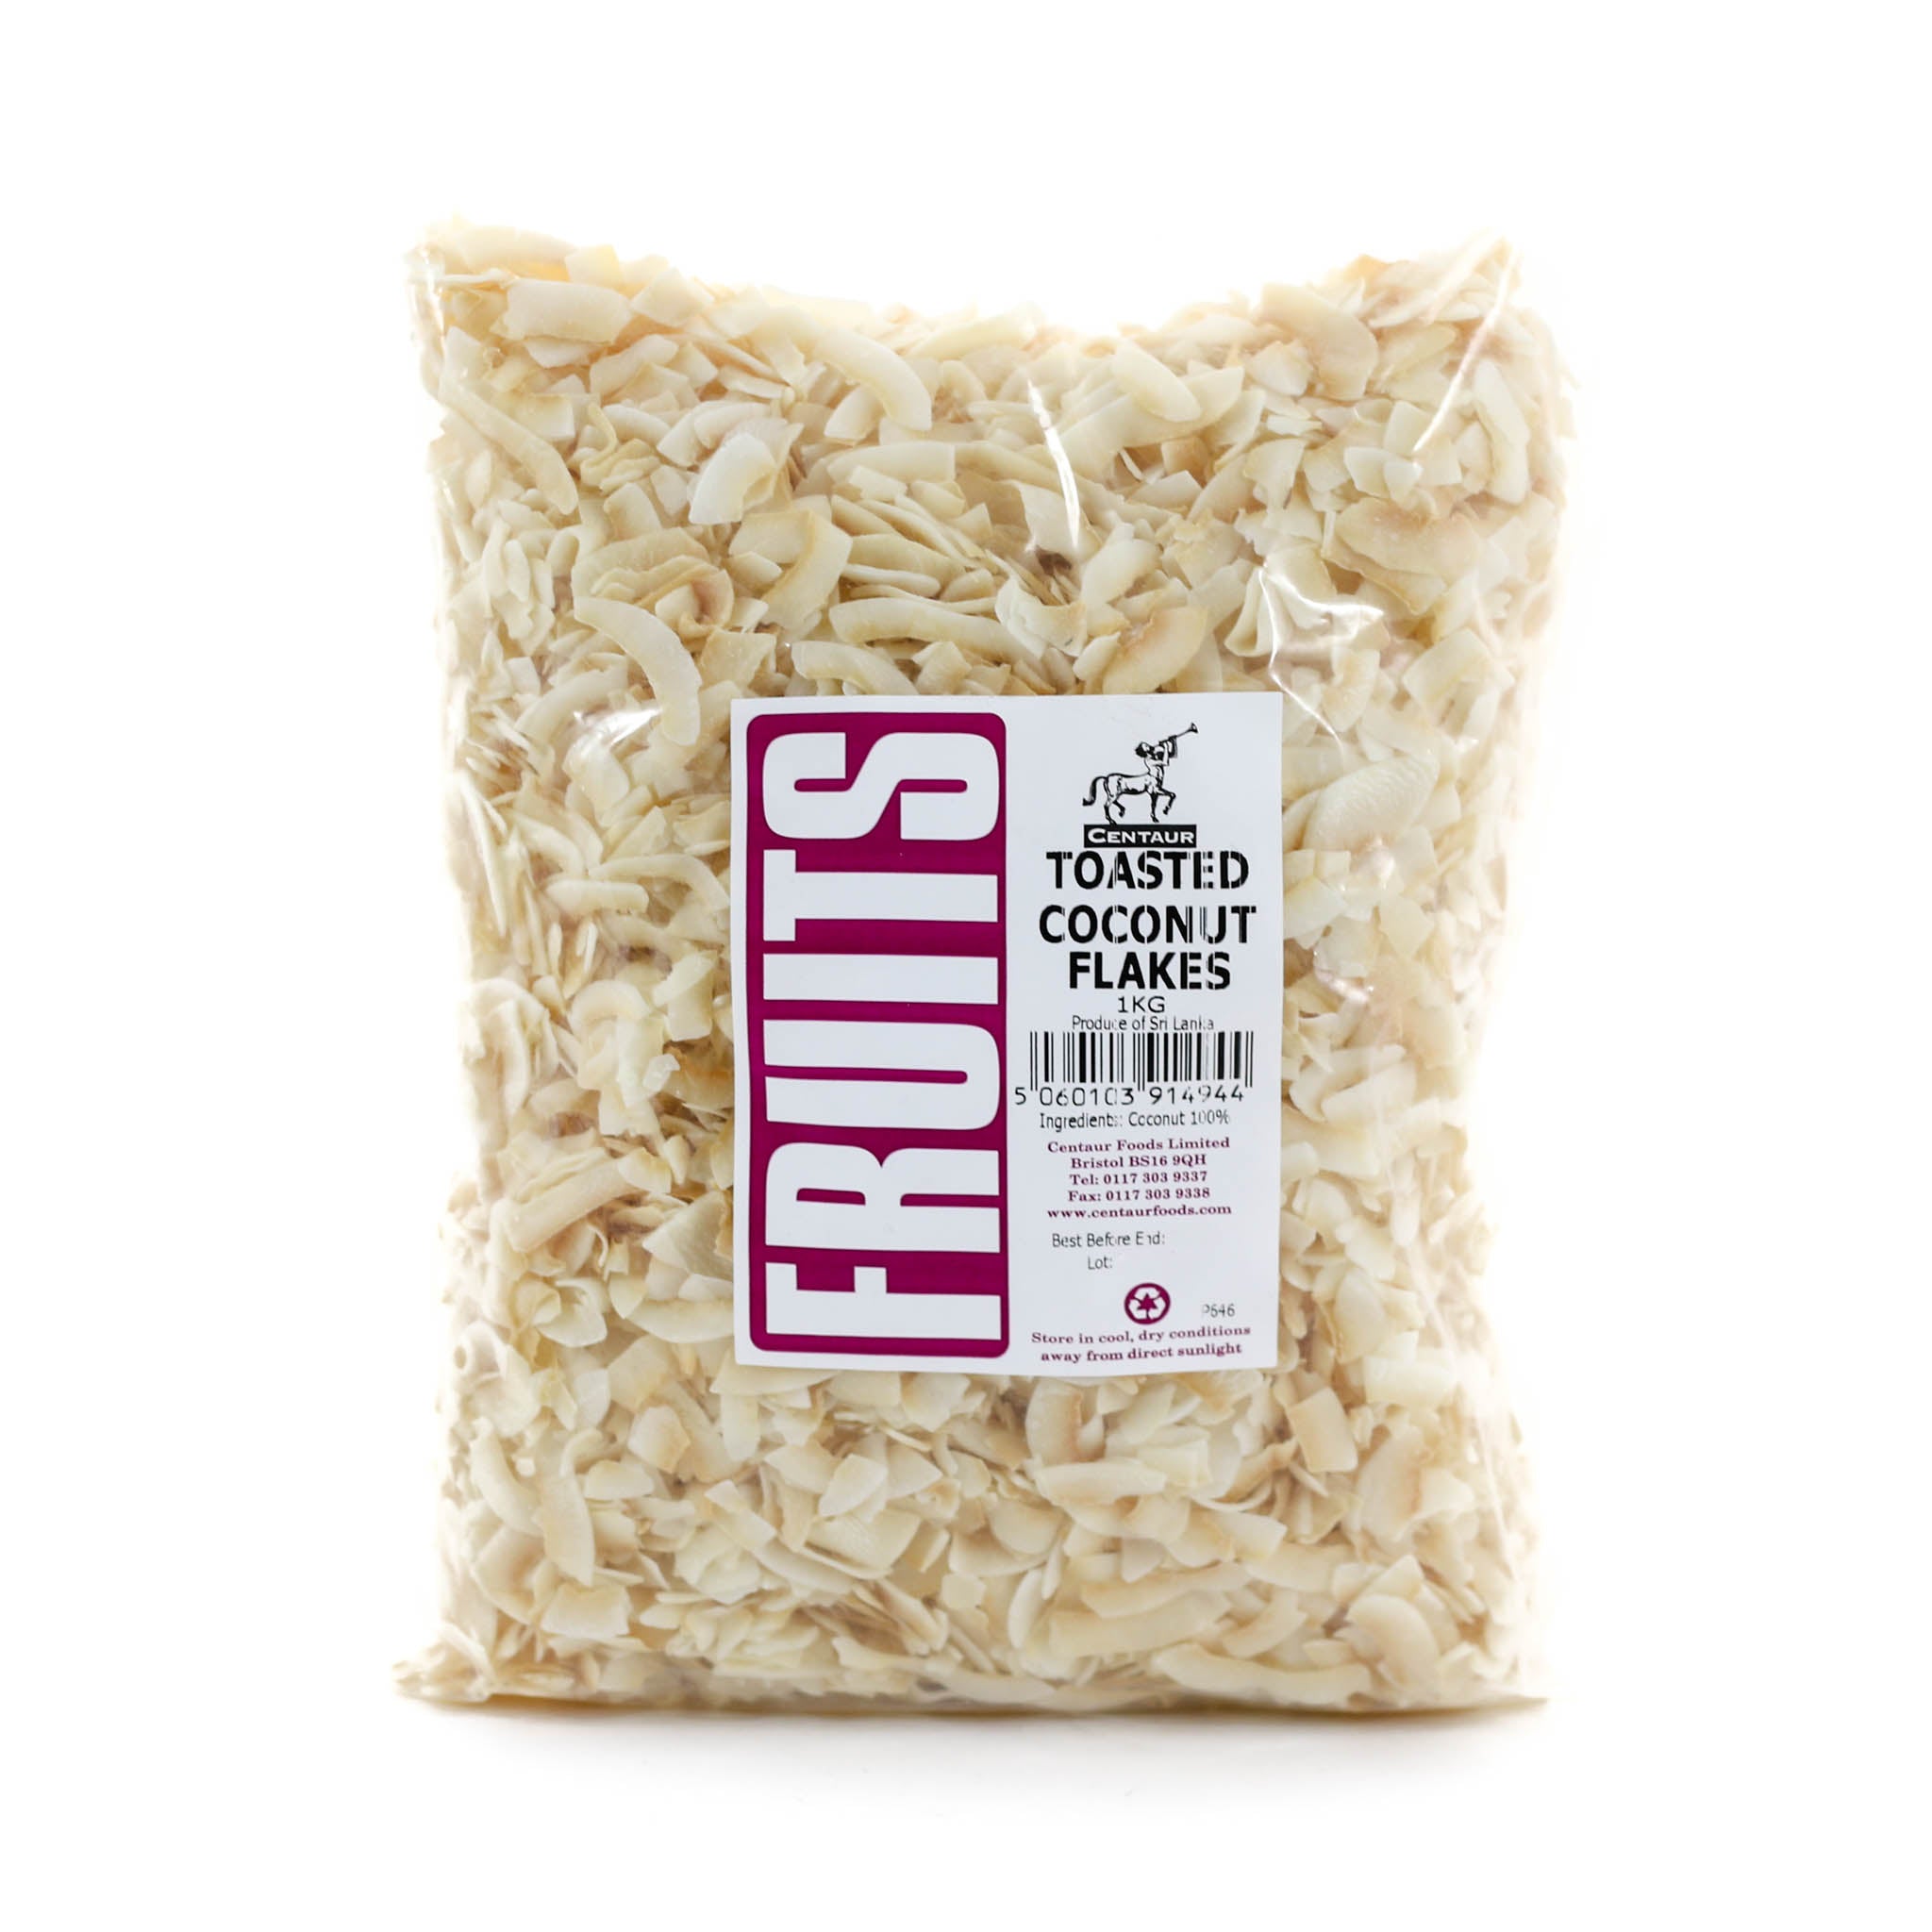 Toasted Coconut Flakes, 1kg